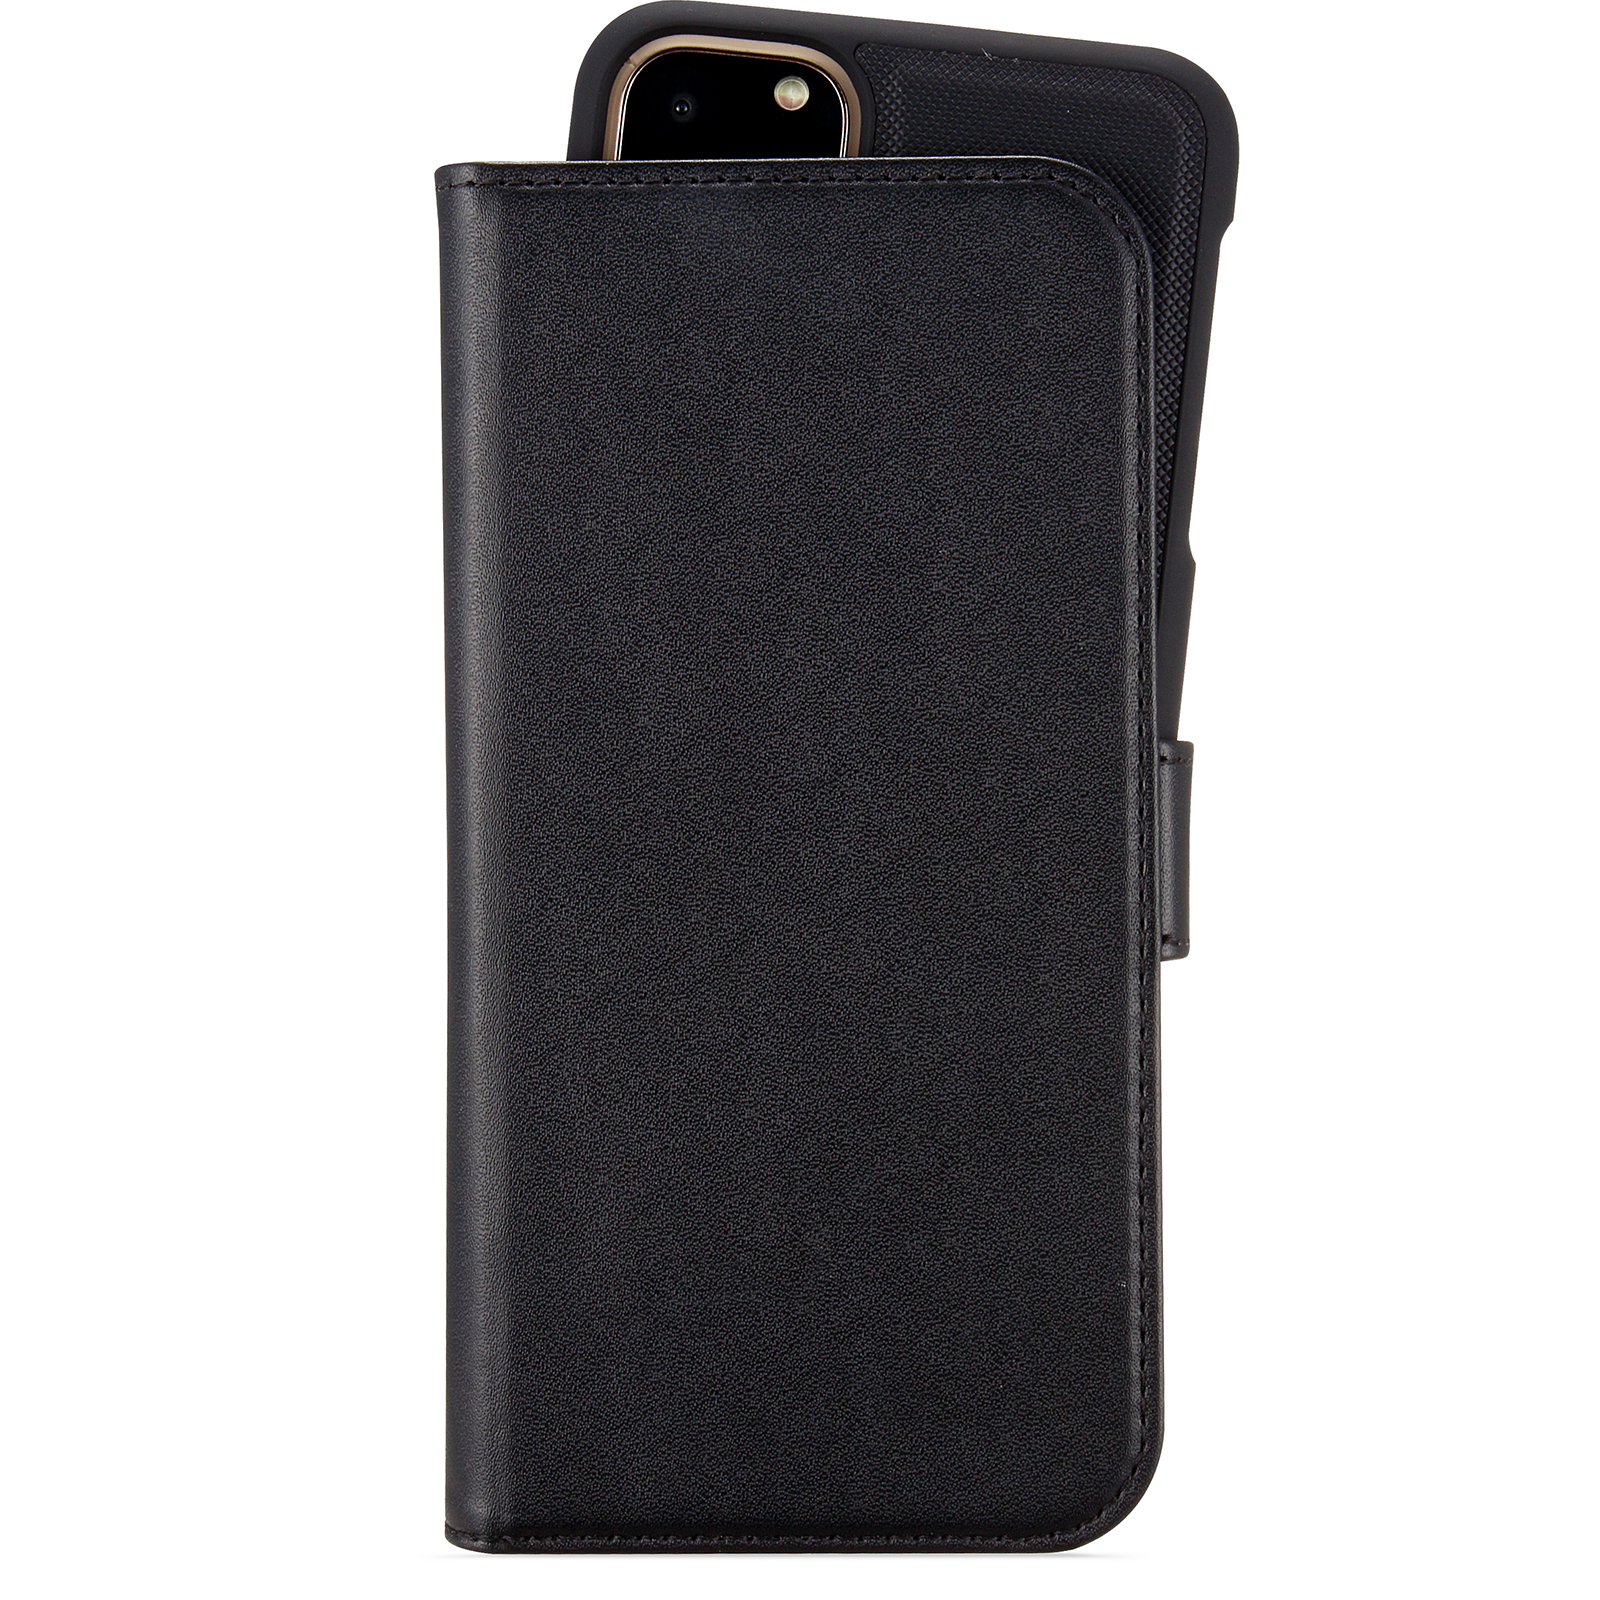 iPhone 11 Pro Max, wallet case magnetic, black